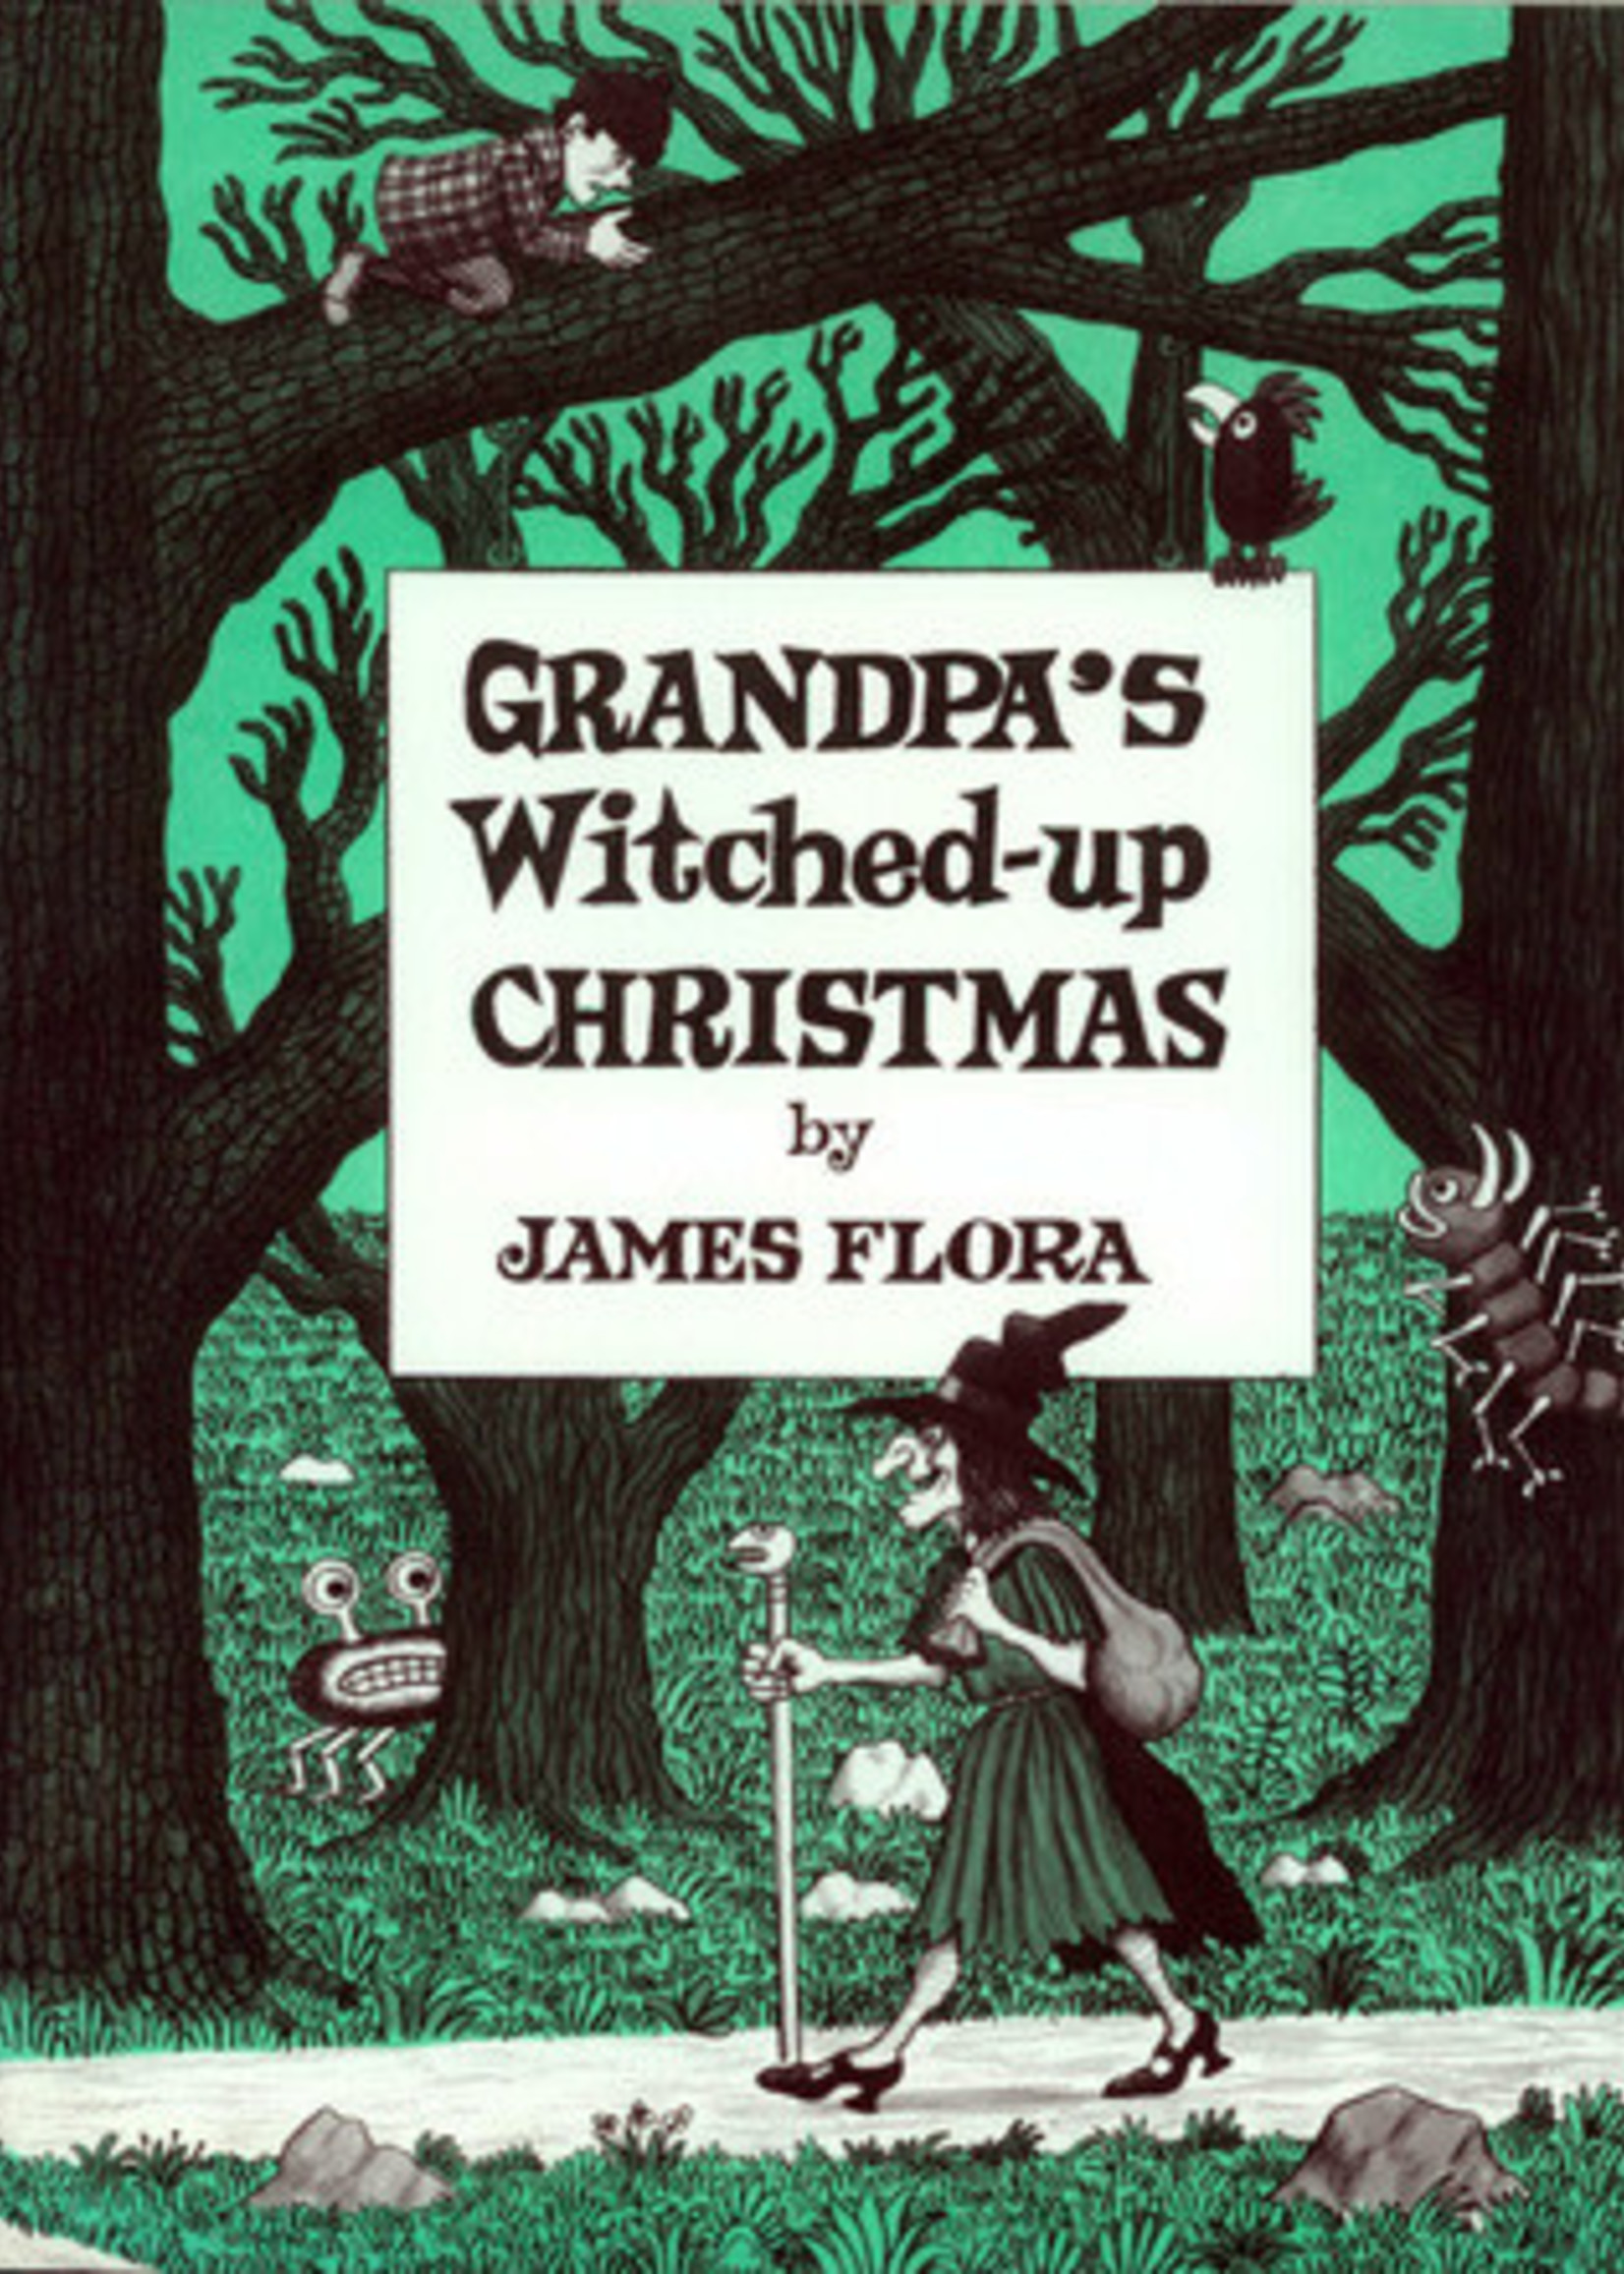 Grandpa's Witched Up Christmas by James Flora